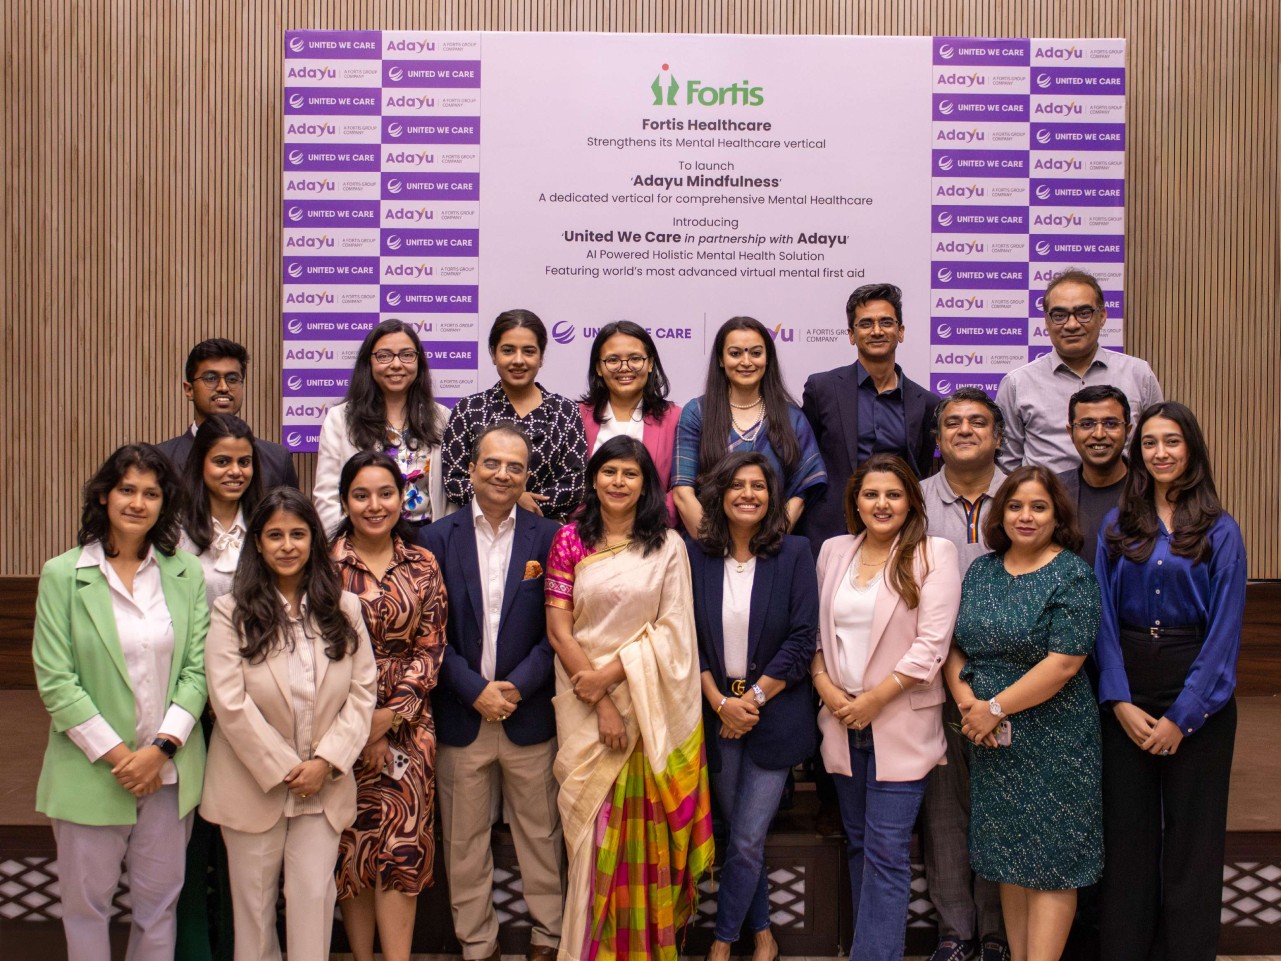 Fortis Healthcare launches AI-powered Adayu Mindfulness app